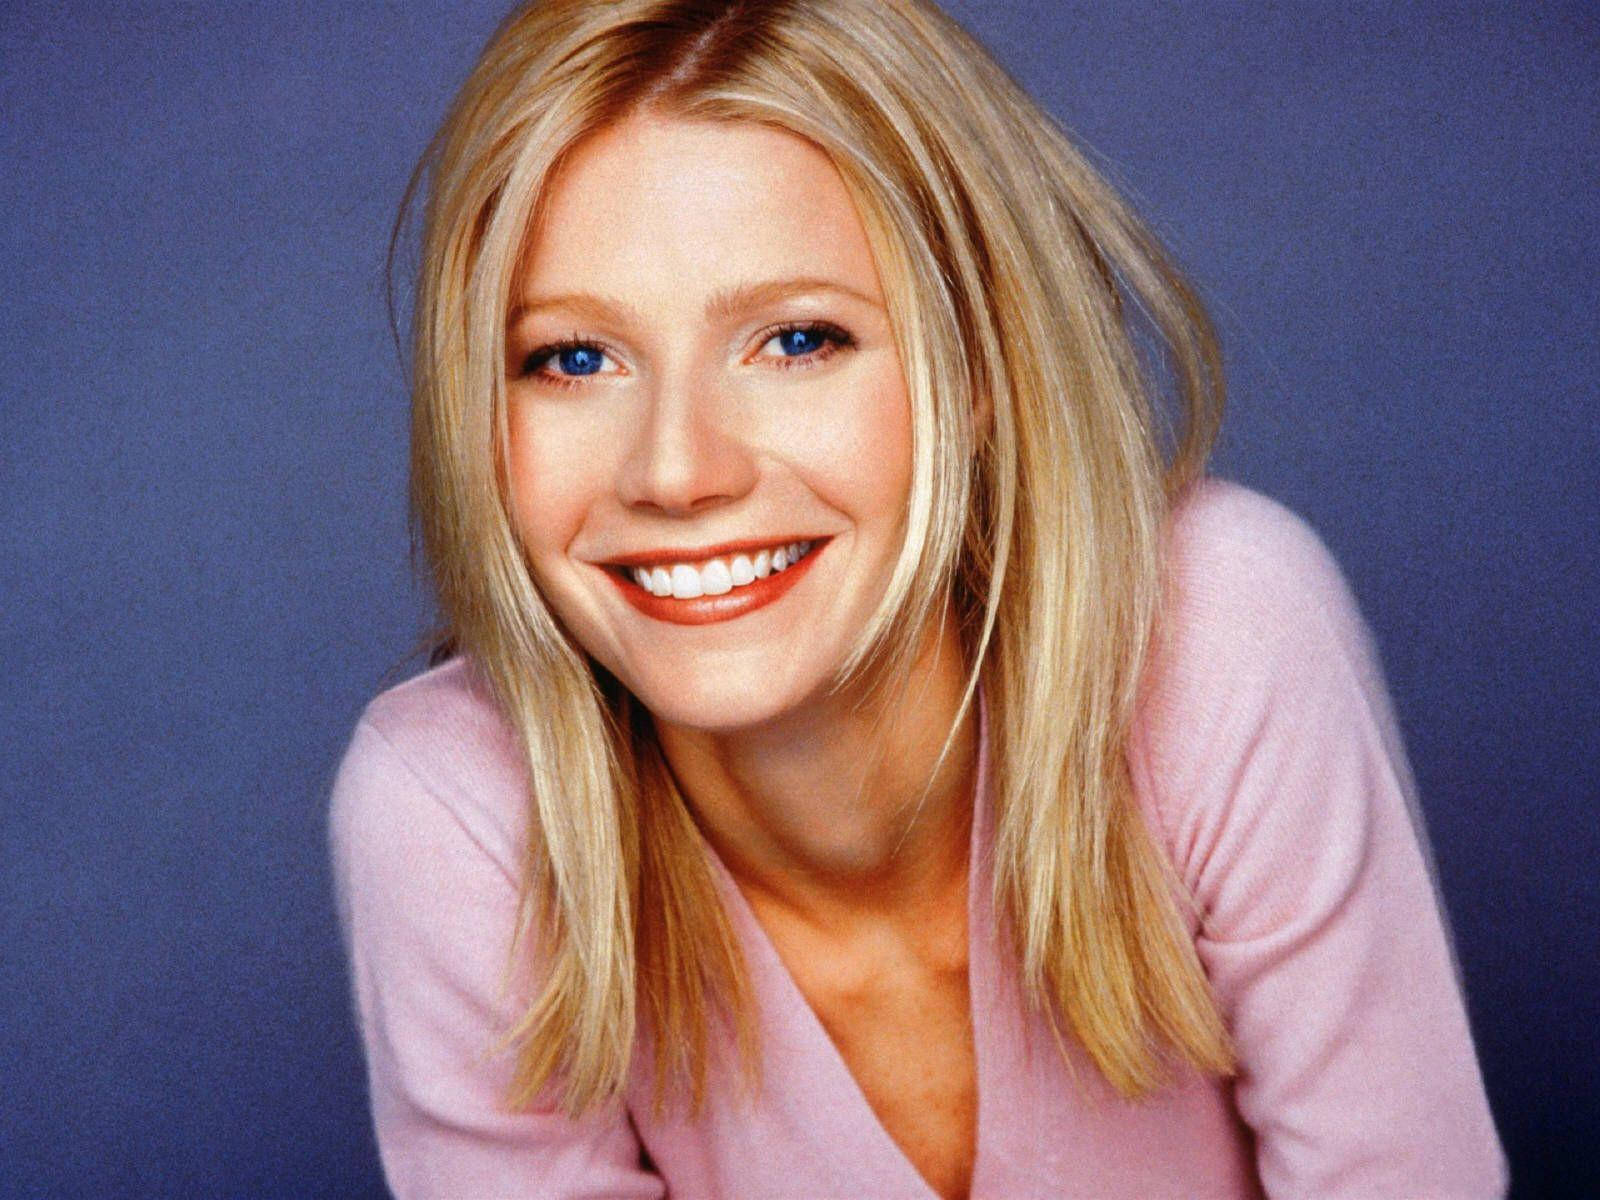 Young American Actress Gwyneth Paltrow Sweet Smile Wallpaper